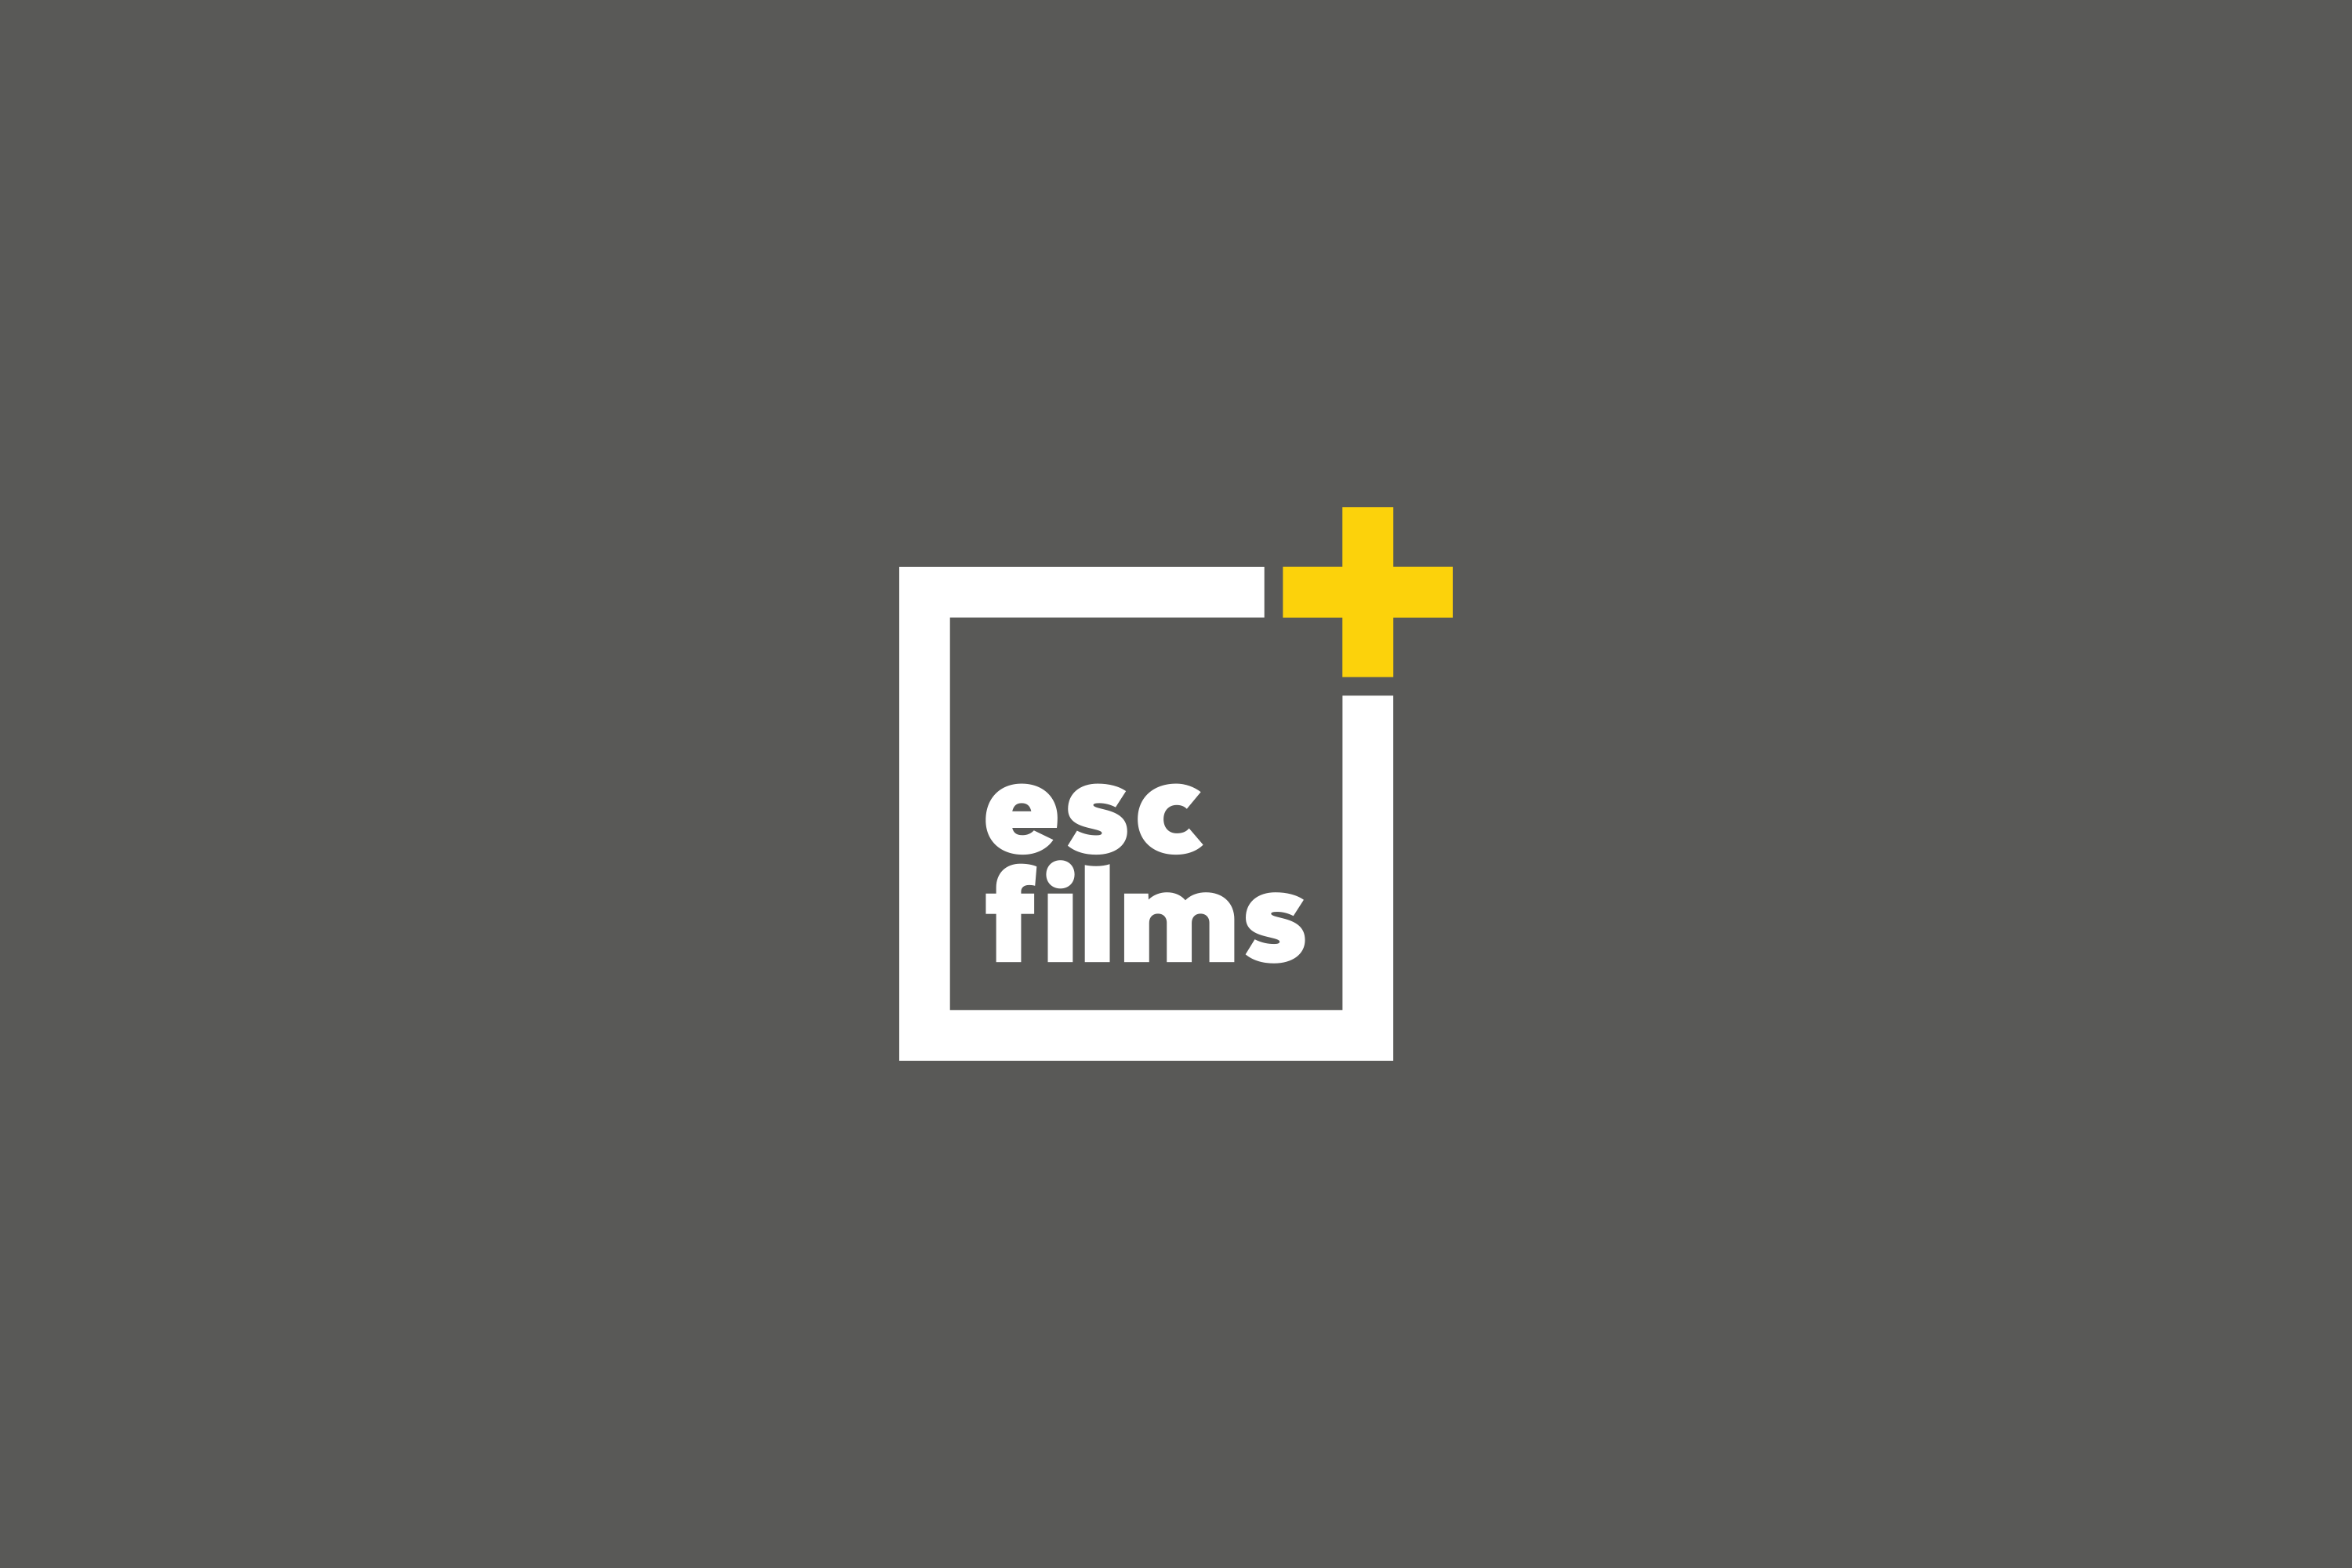 grey screen with esc films in a box with yellow plus sign in top right corner